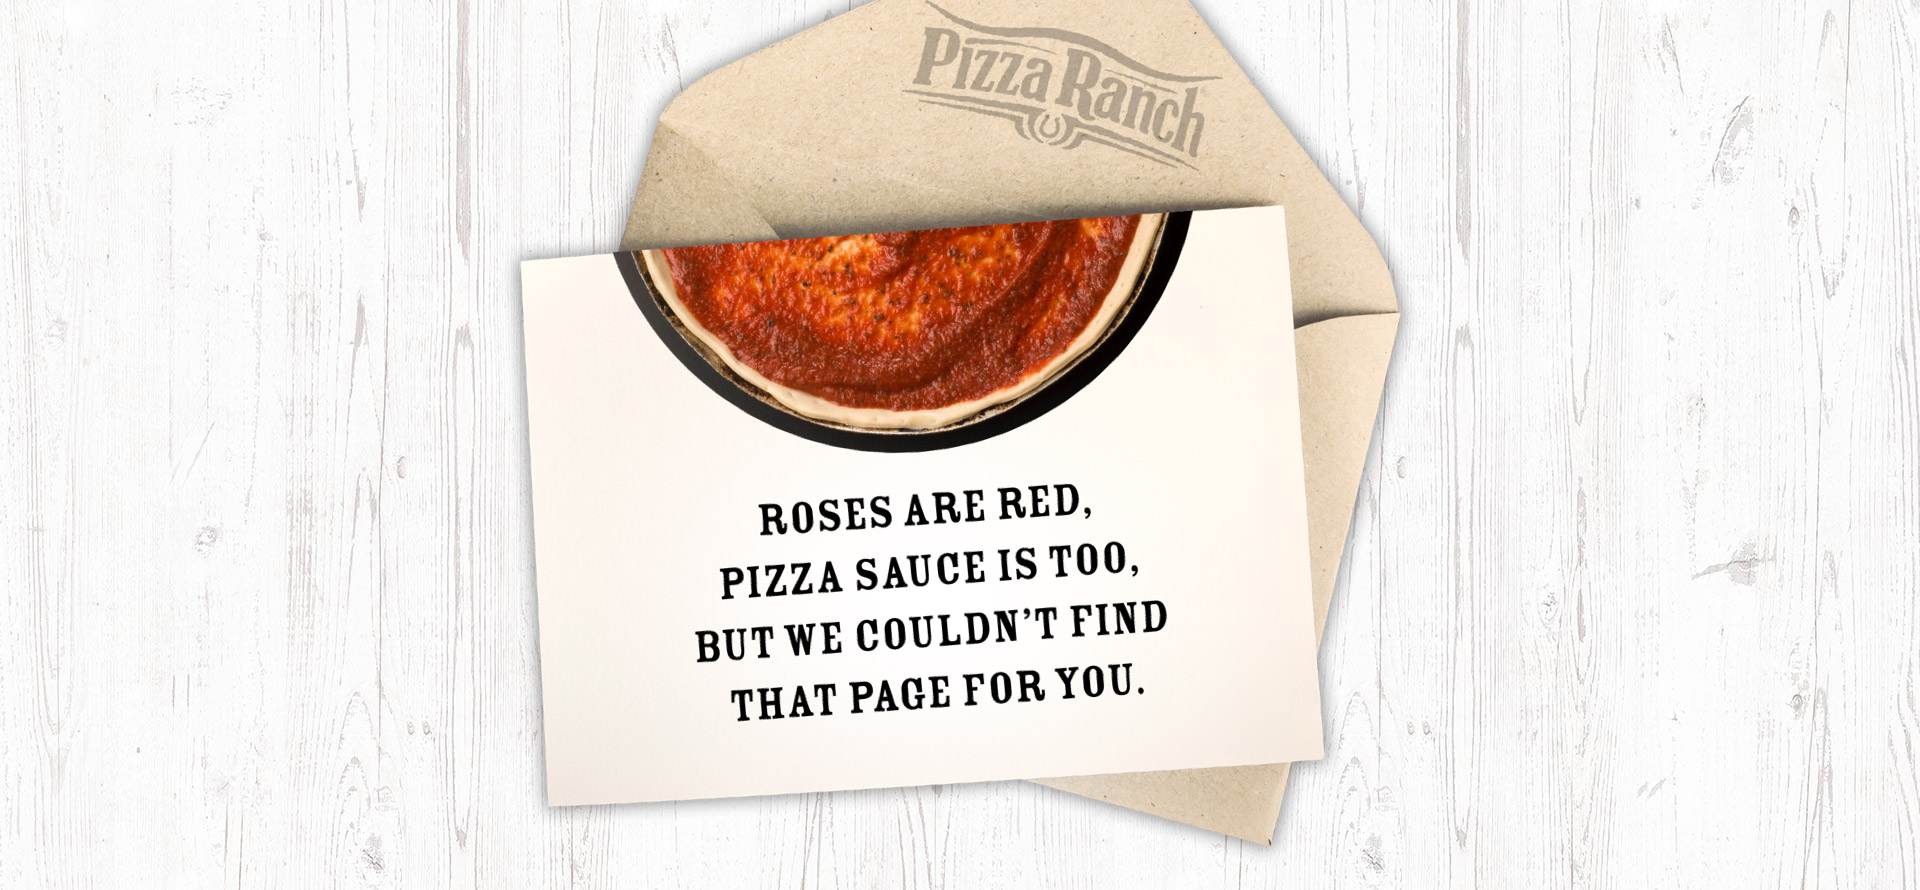 Roses are red, pizza sauce is too, but we couldn't find that page for you.